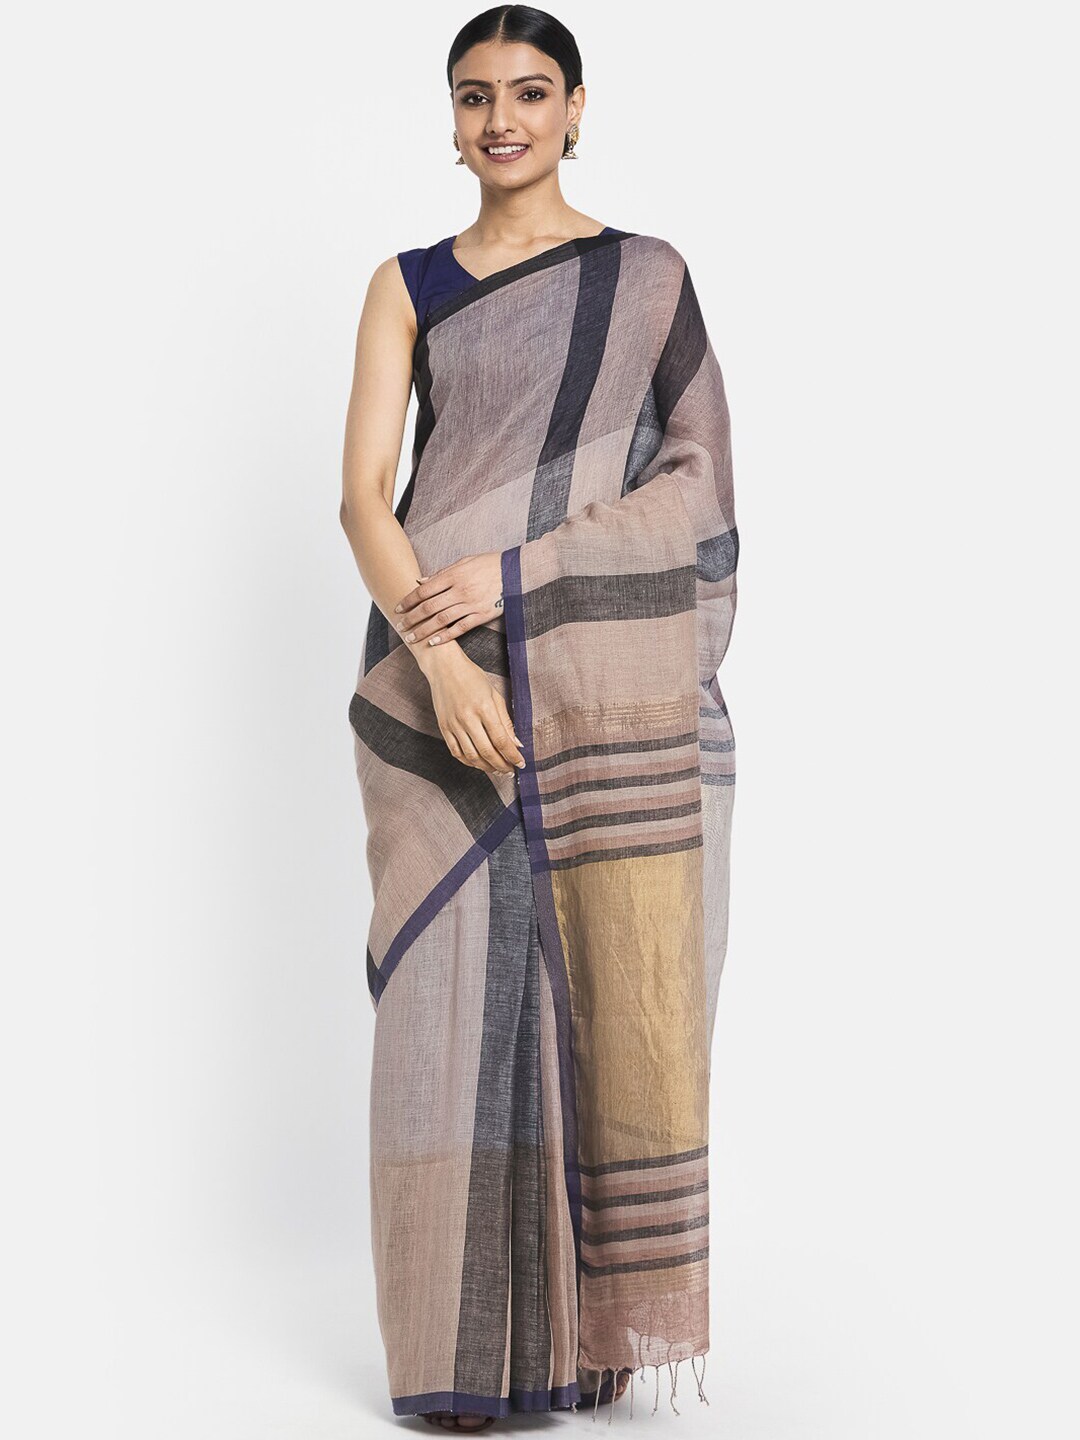 Fabindia Grey & Navy Blue Striped Pure Linen Saree Price in India